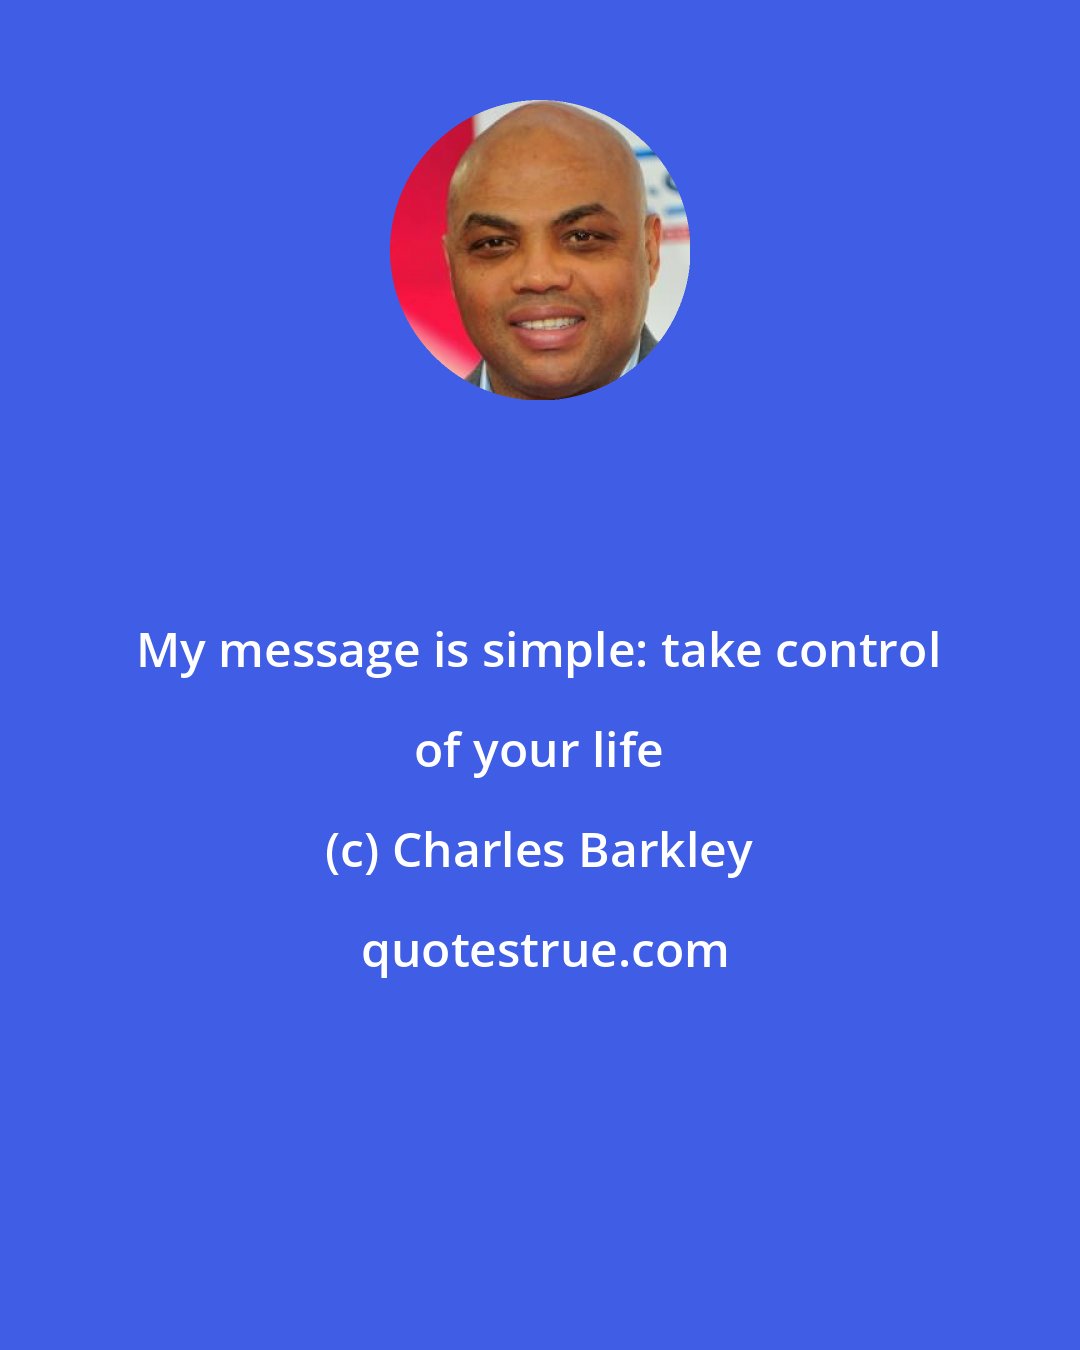 Charles Barkley: My message is simple: take control of your life